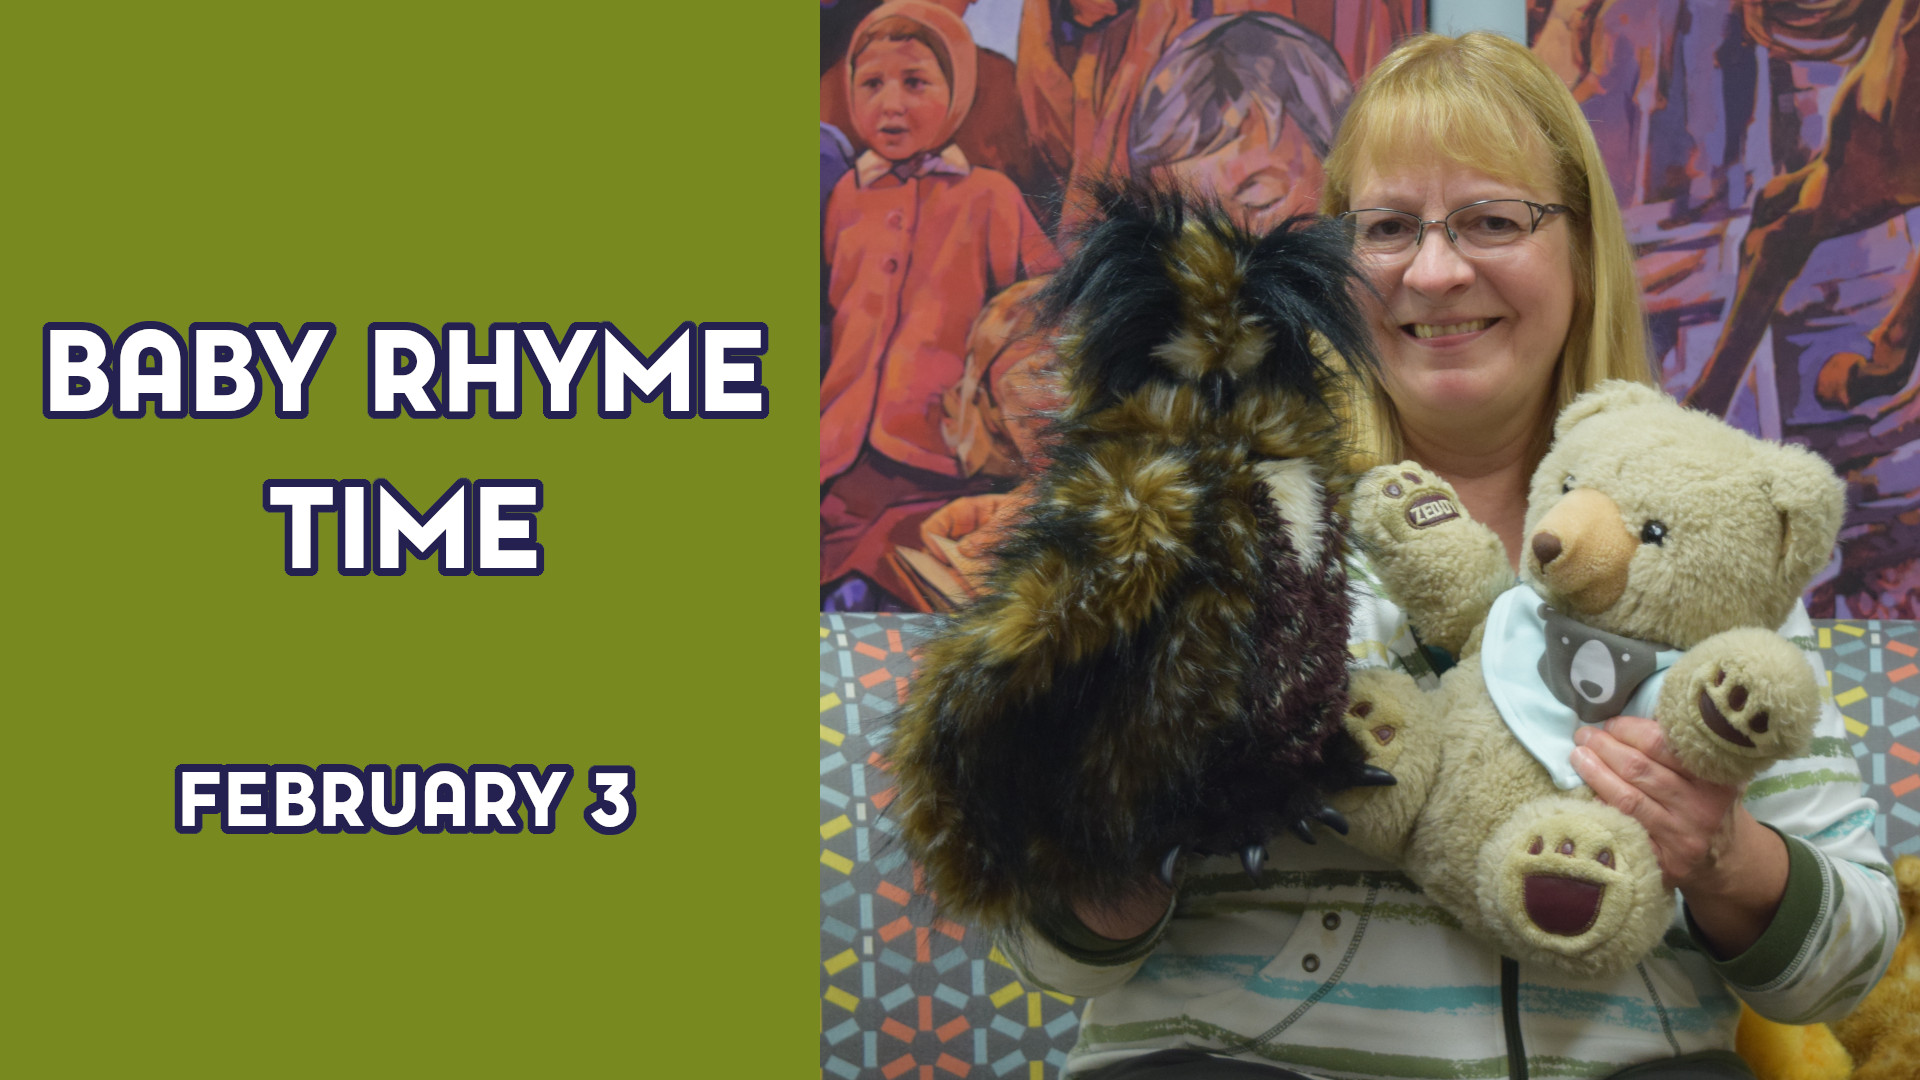 A woman holds puppets next to the text "Baby Rhyme Time February 3"